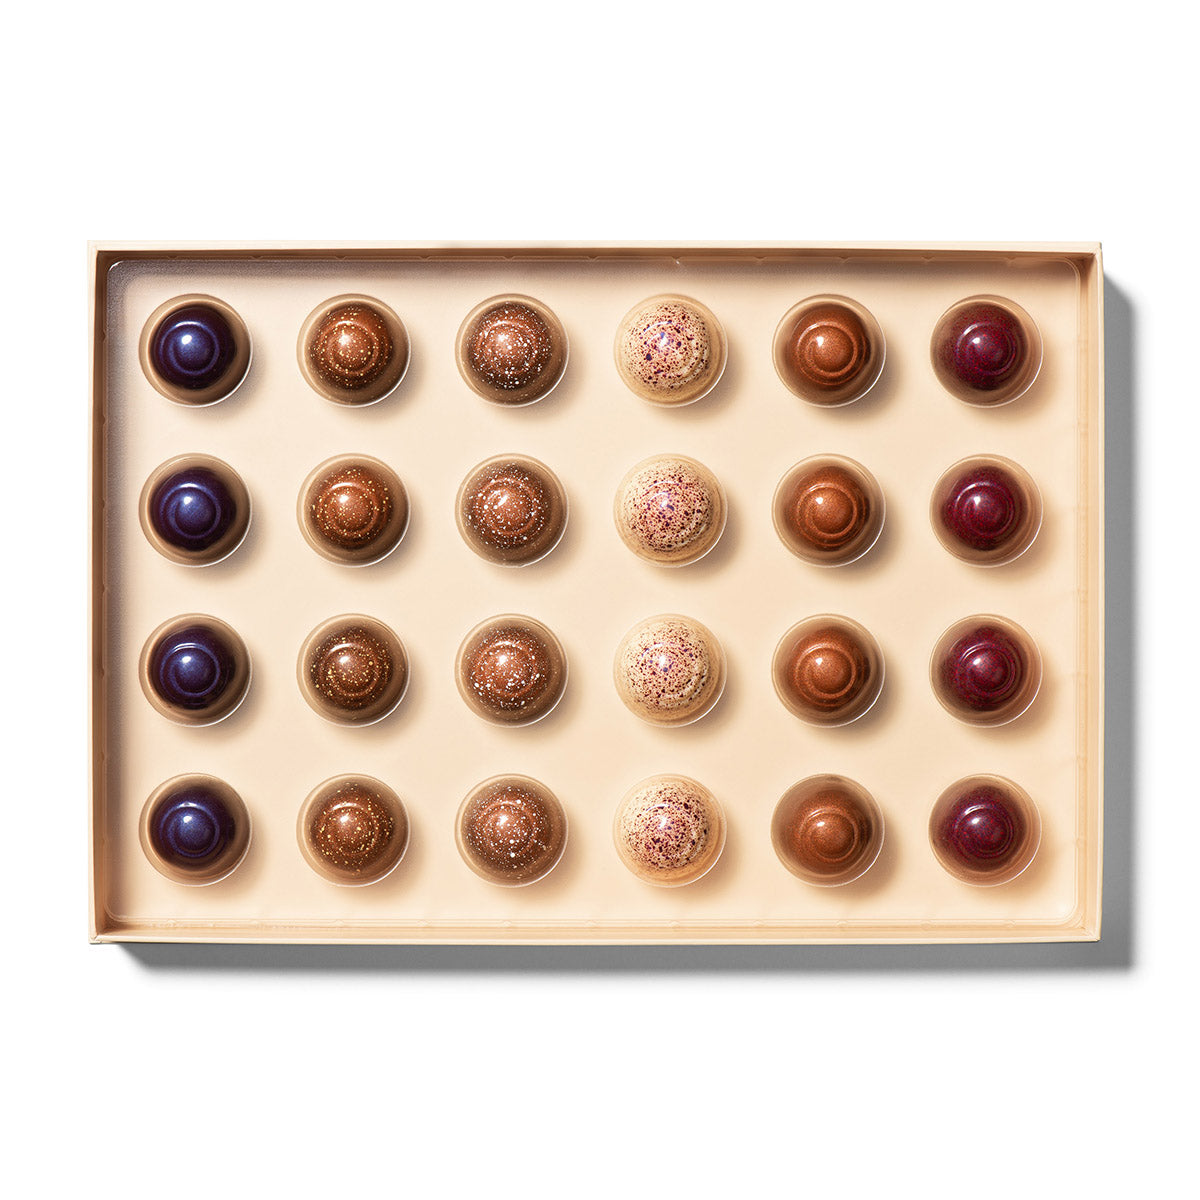 Ethel M Chocolates 24-piece Truffles Collection Lifestyle Open Box Image - Shows the truffles inside the box.